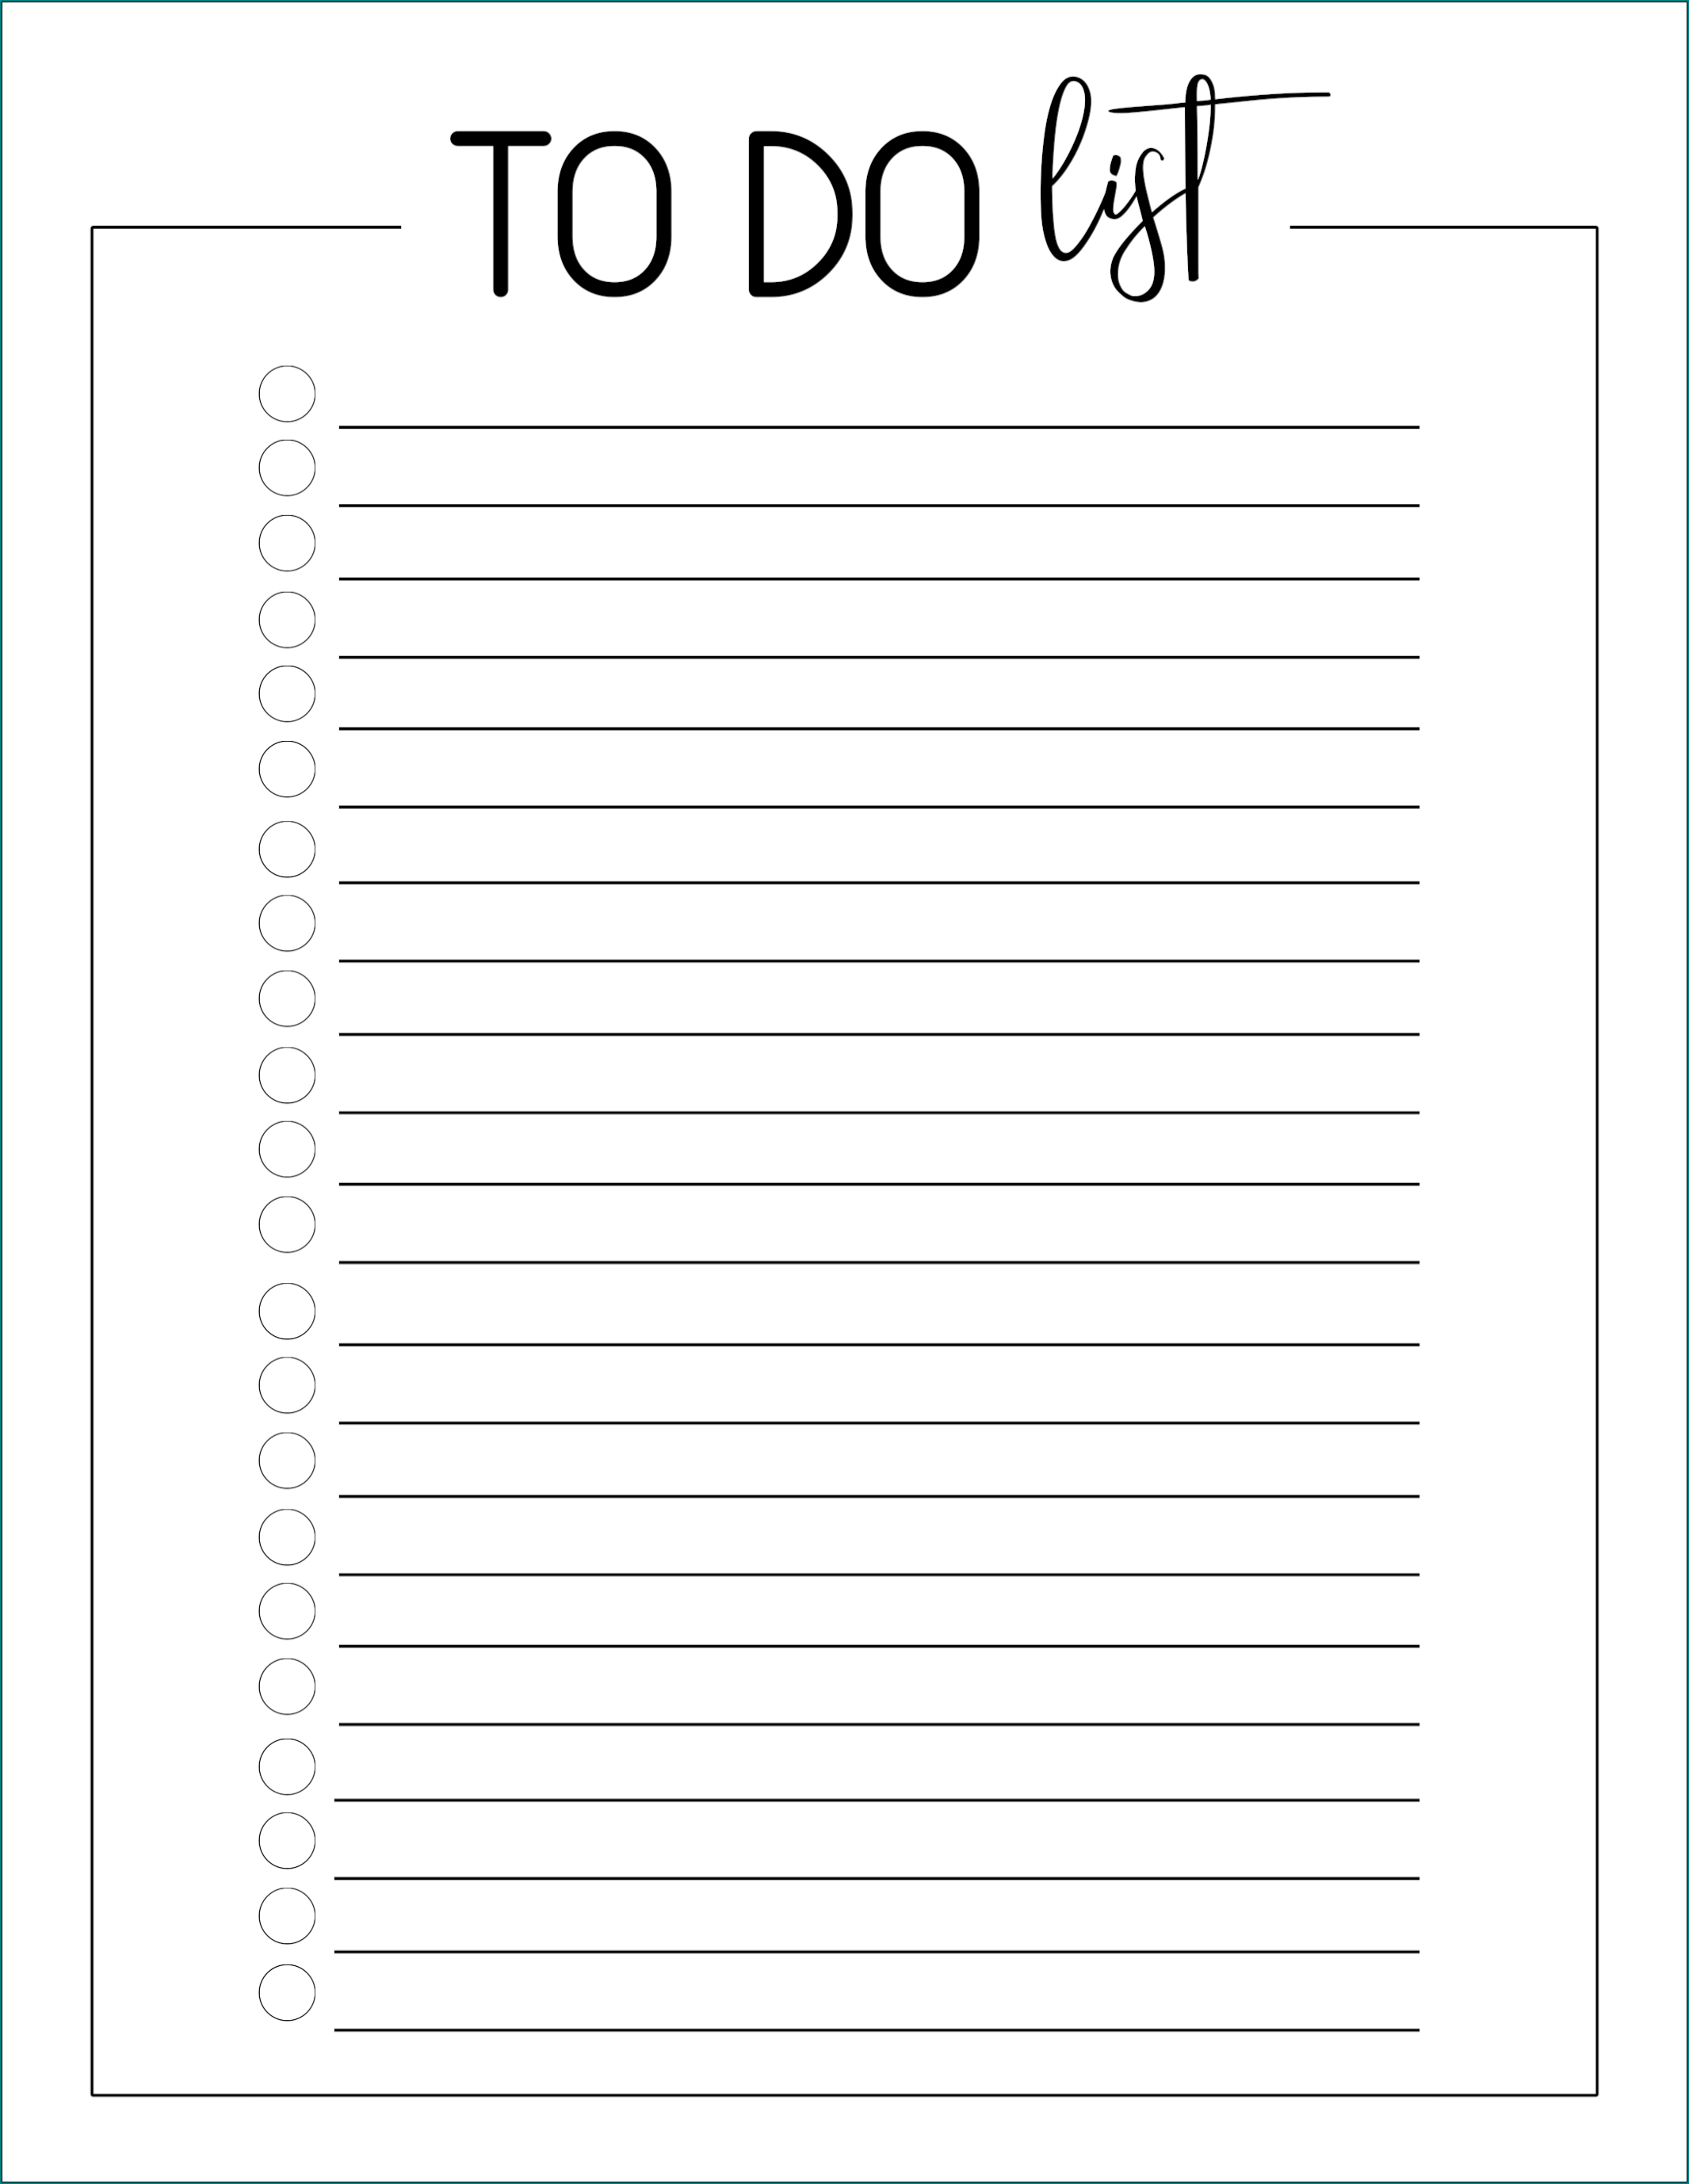 To Do List Template Example